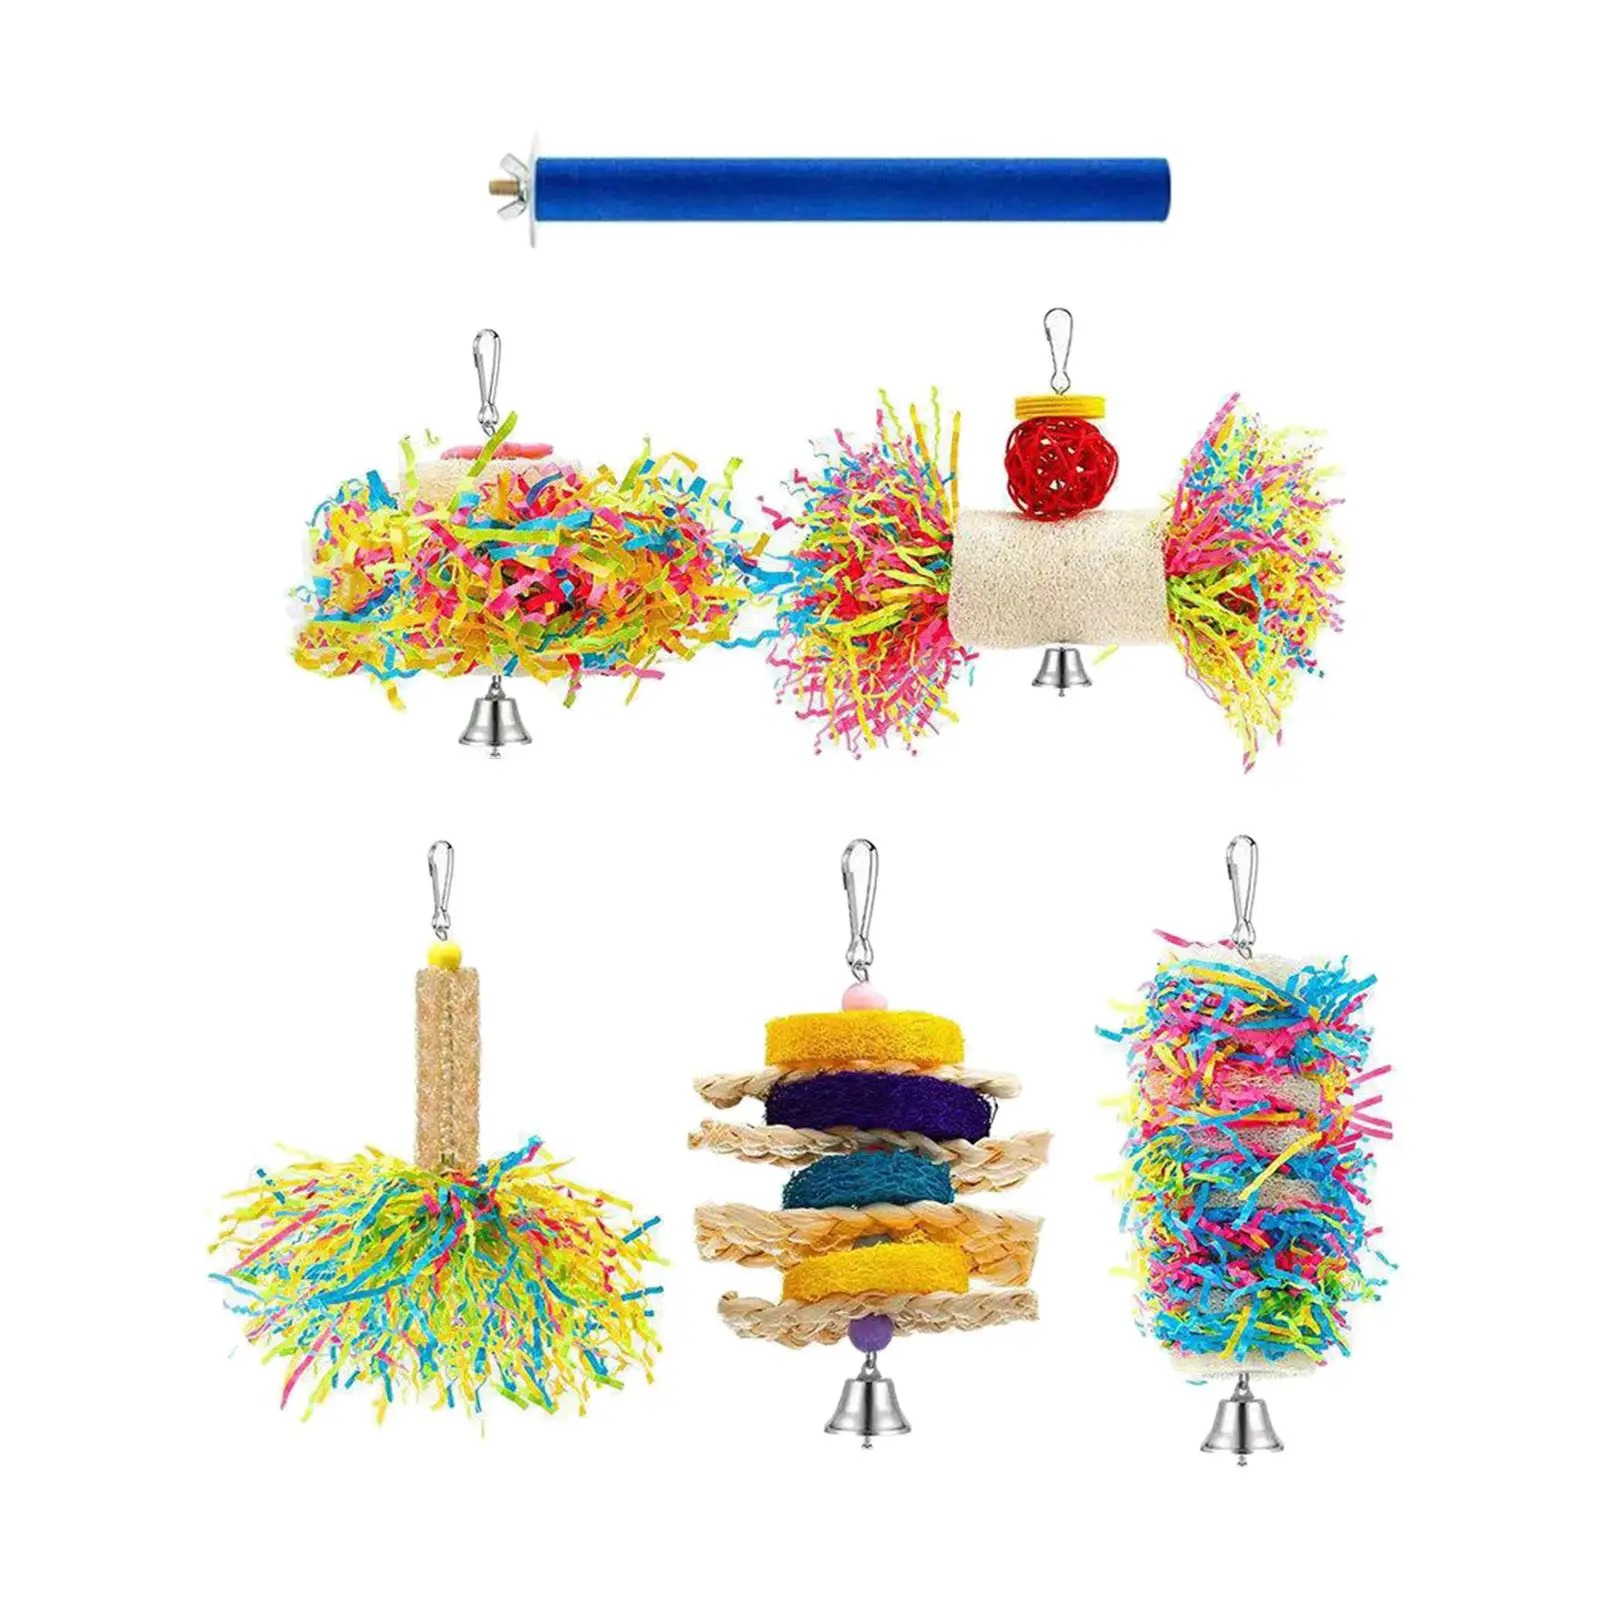 6x Parrot Cage Hanging Toys Hanging Bell Bird Toy Hammock Birds Swing Chewing for Macaws Lovebird Cockatiels Small Parakeets